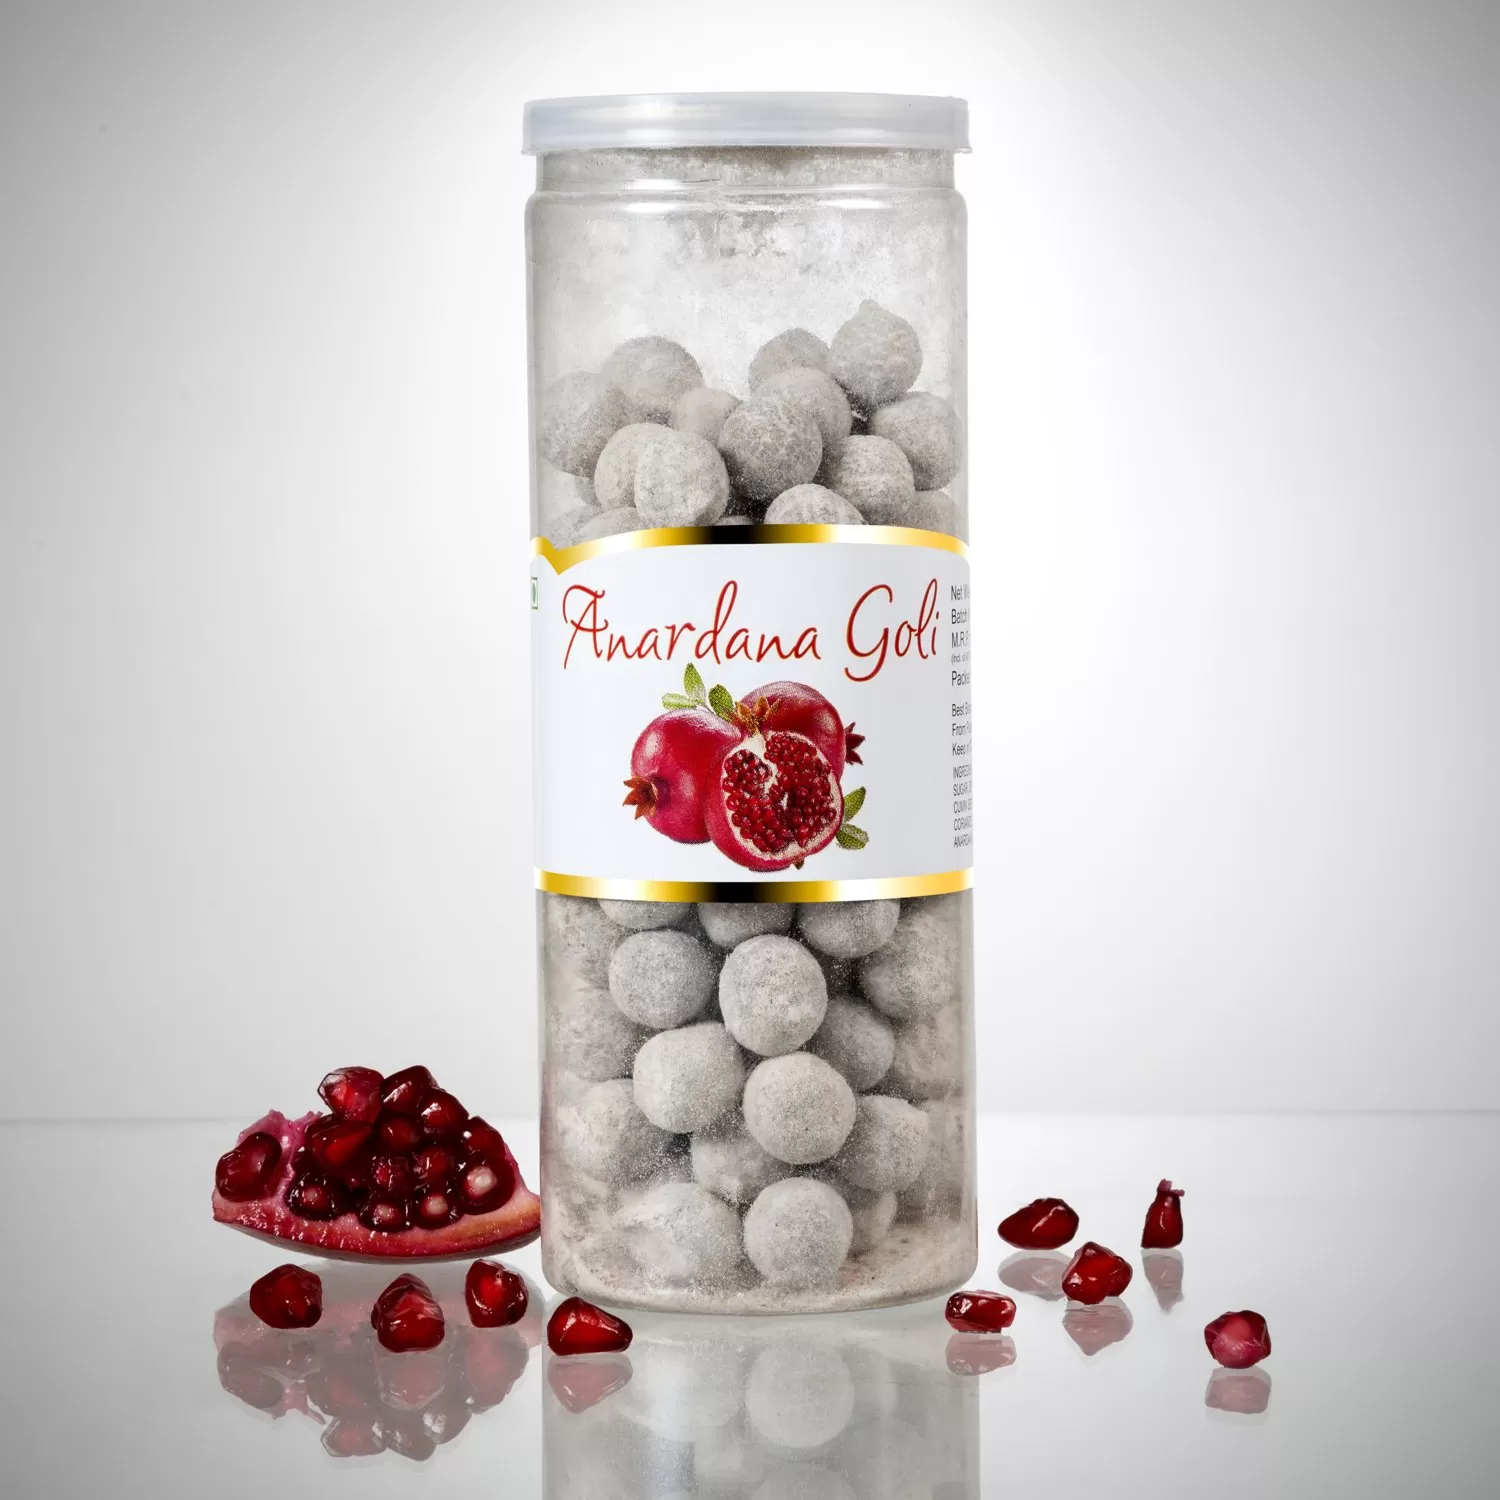 Anardana (Pomegranate) Goli Box - Indian Special Sour and Spices Flavour 200 GR (7.05oz), 2 image